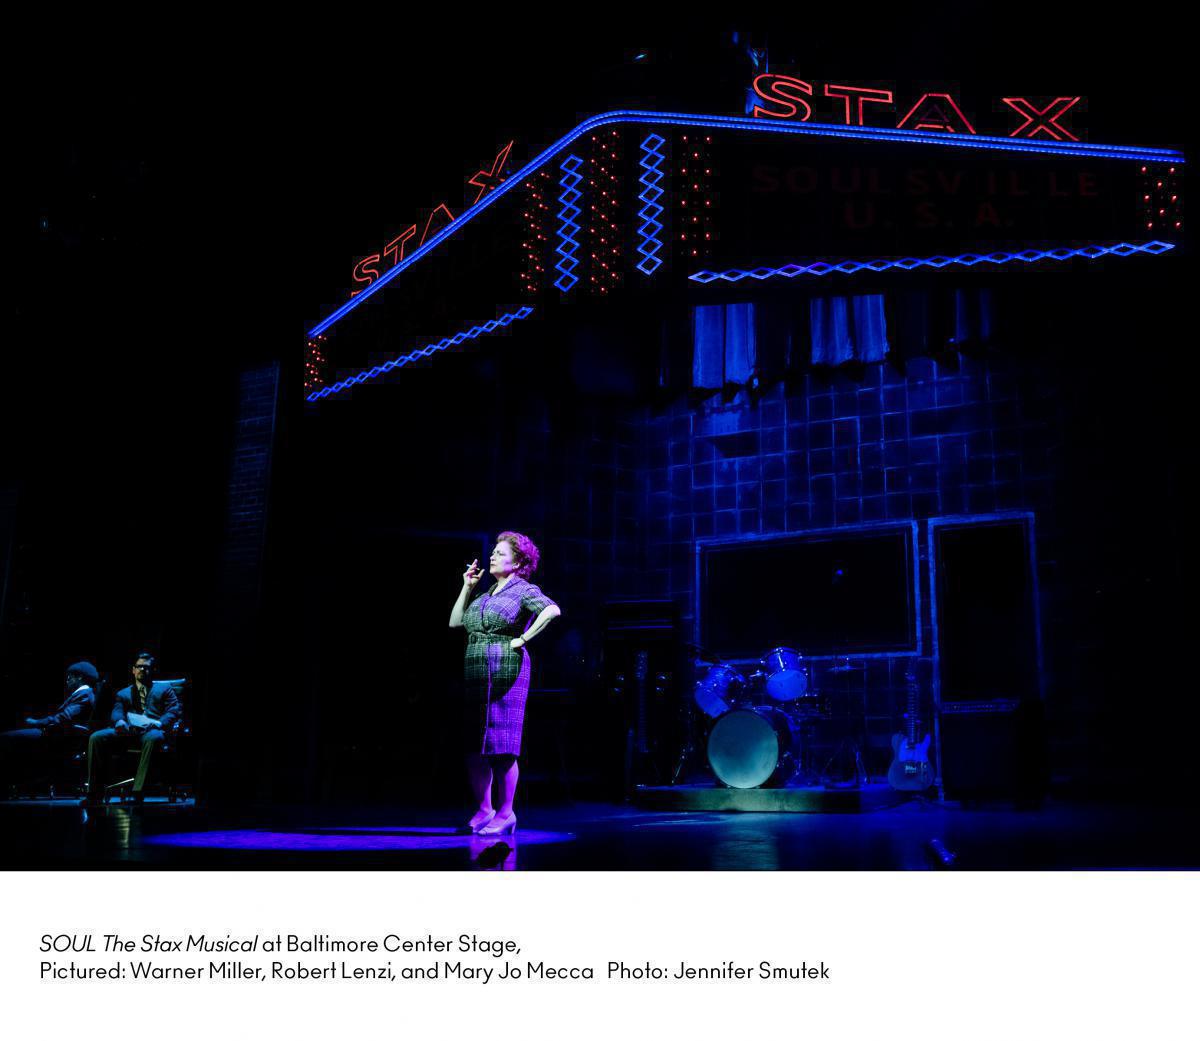 Photo 6 in 'SOUL -  The STAX Musical' gallery showcasing lighting design by Mike Baldassari of Mike-O-Matic Industries LLC